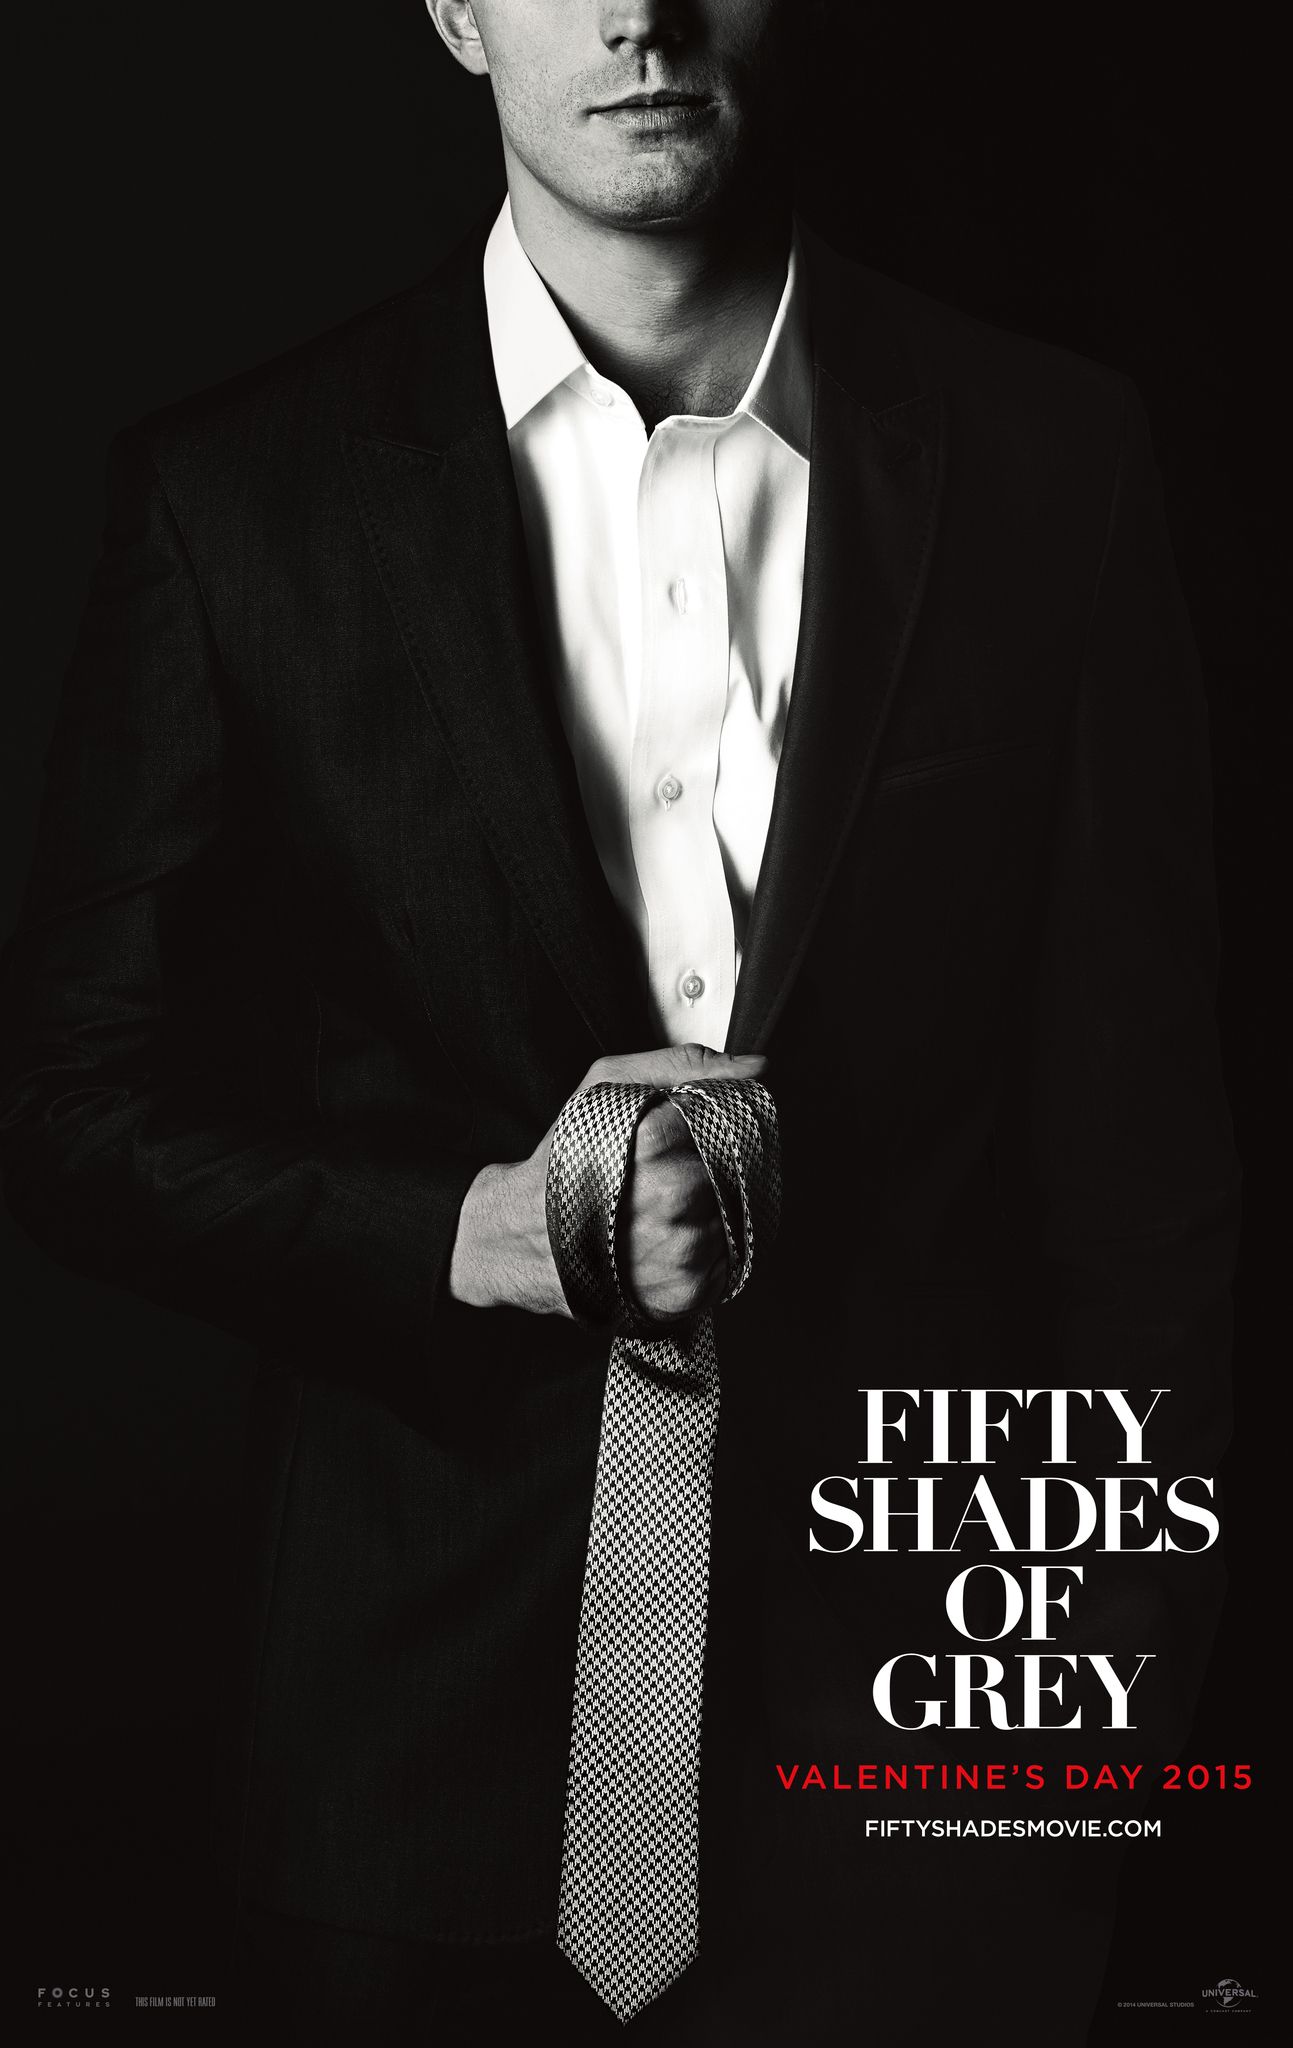 Fifty Shades of Grey Film Poster